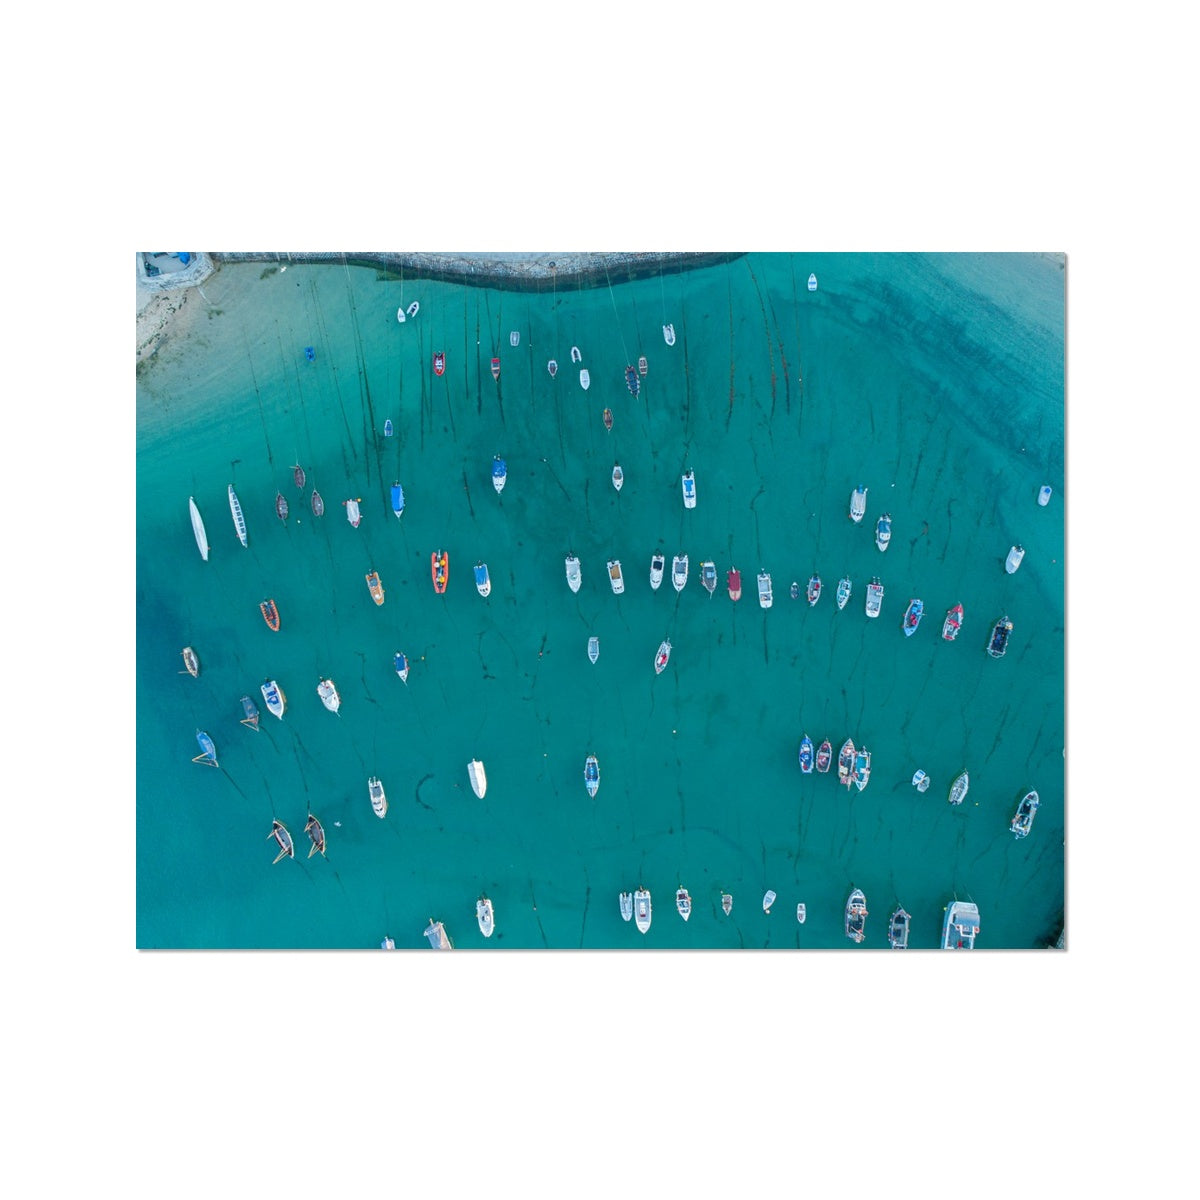 st ives boats from above